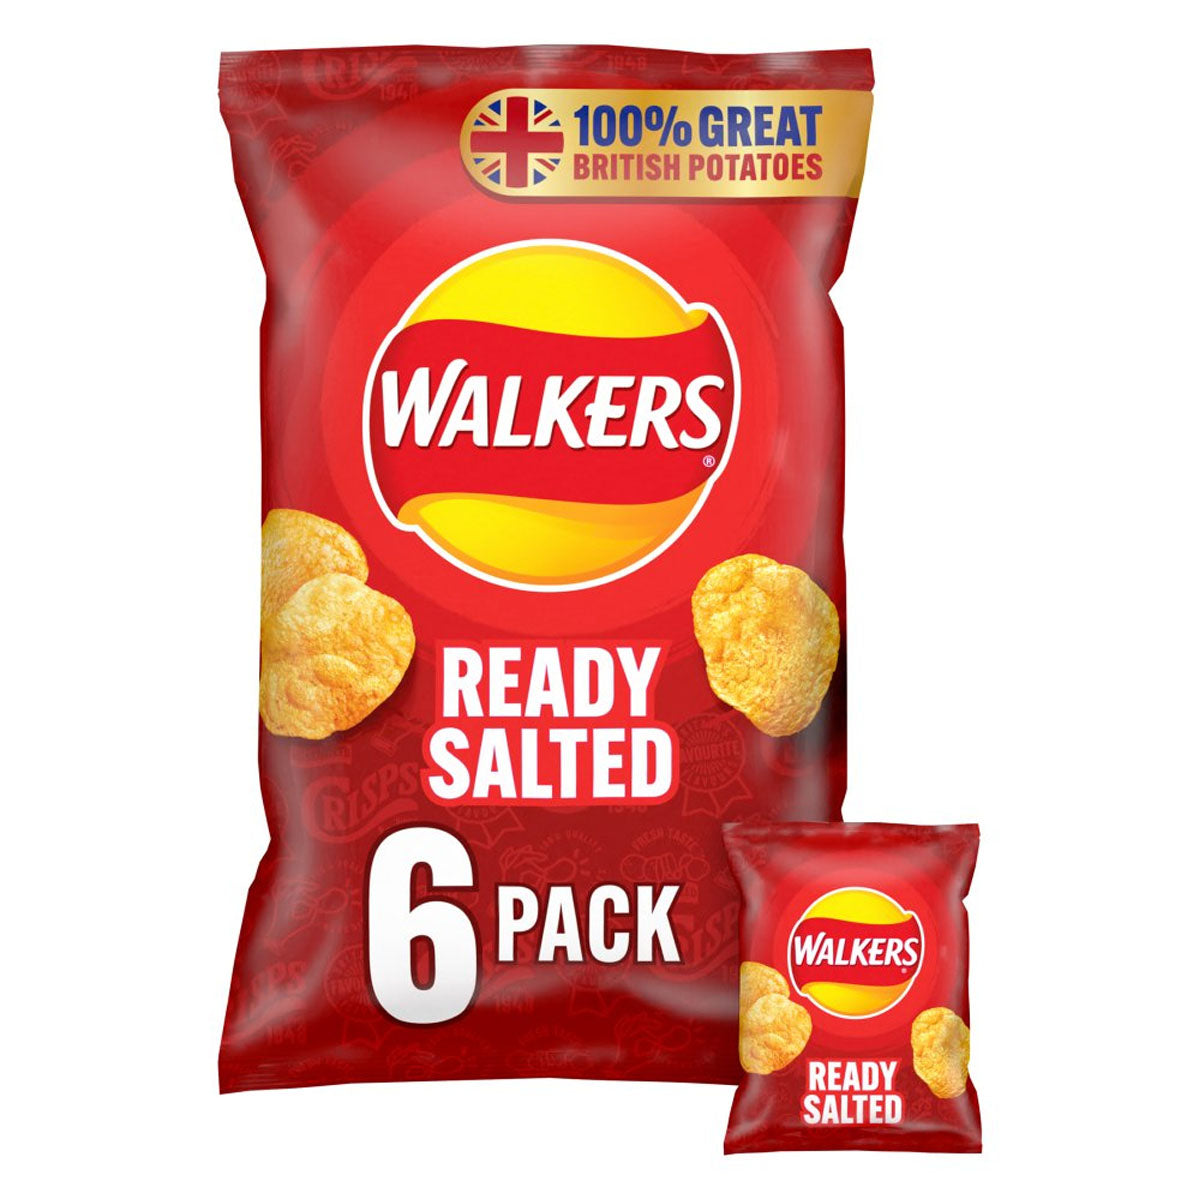 Walkers - Ready Salted Multipack Crisps - 6x25g 6 pack.